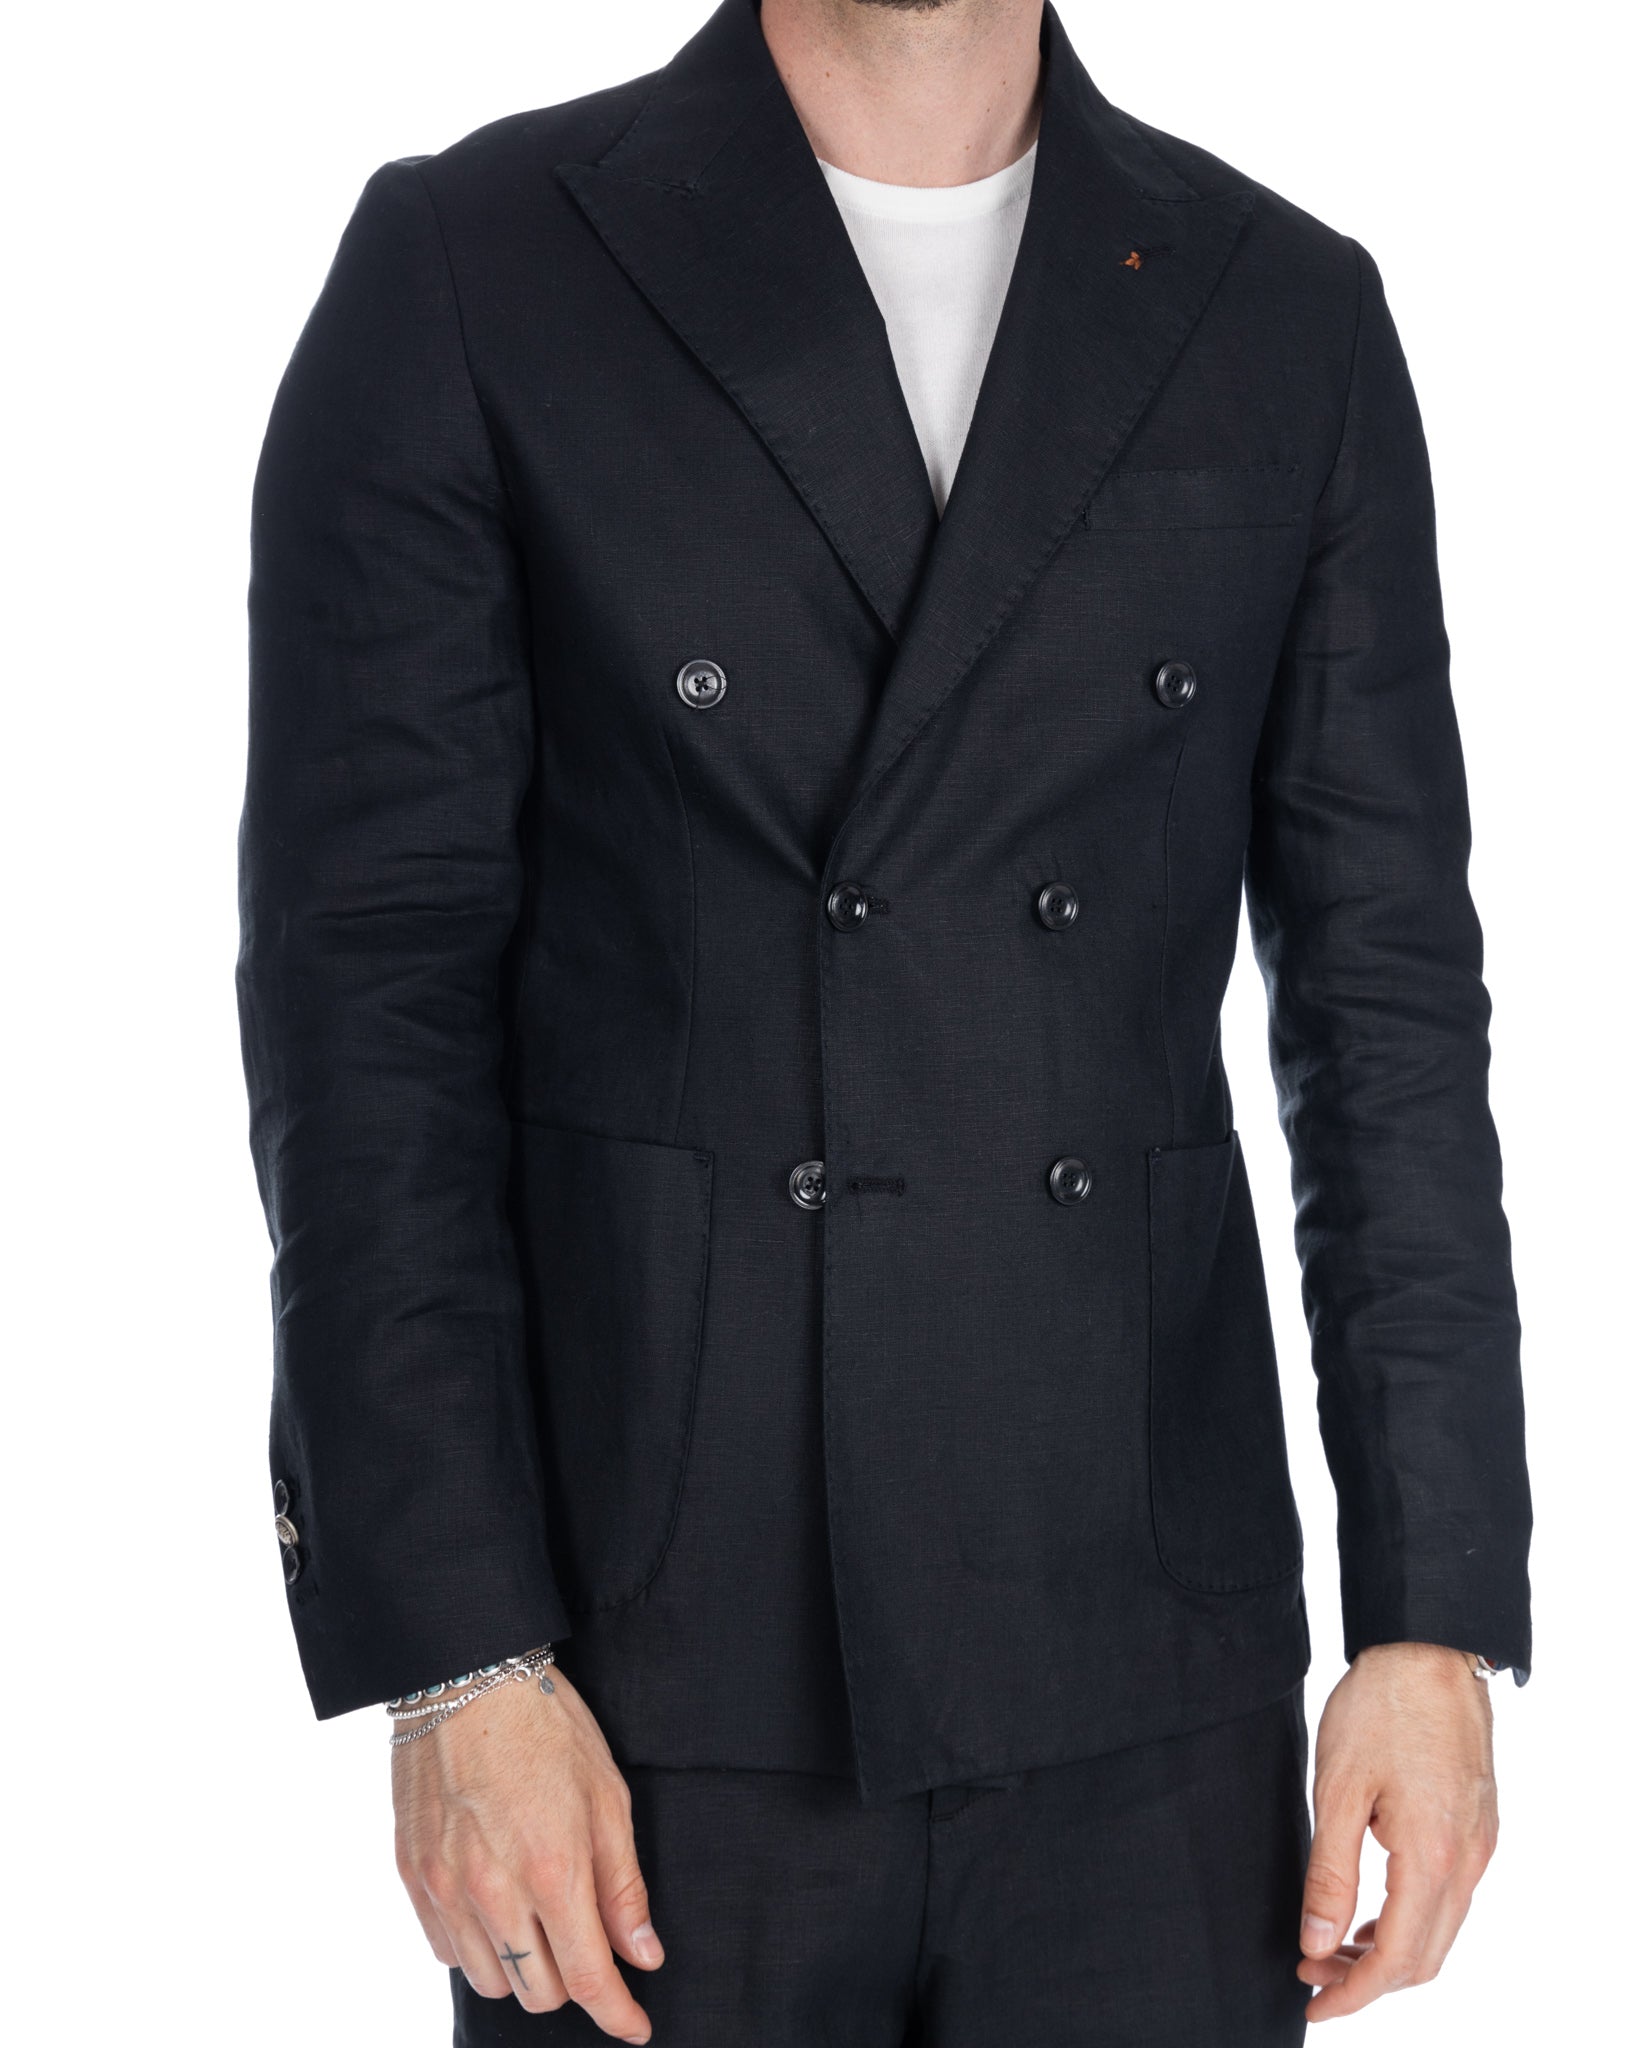 Baunei - pure black linen double-breasted jacket